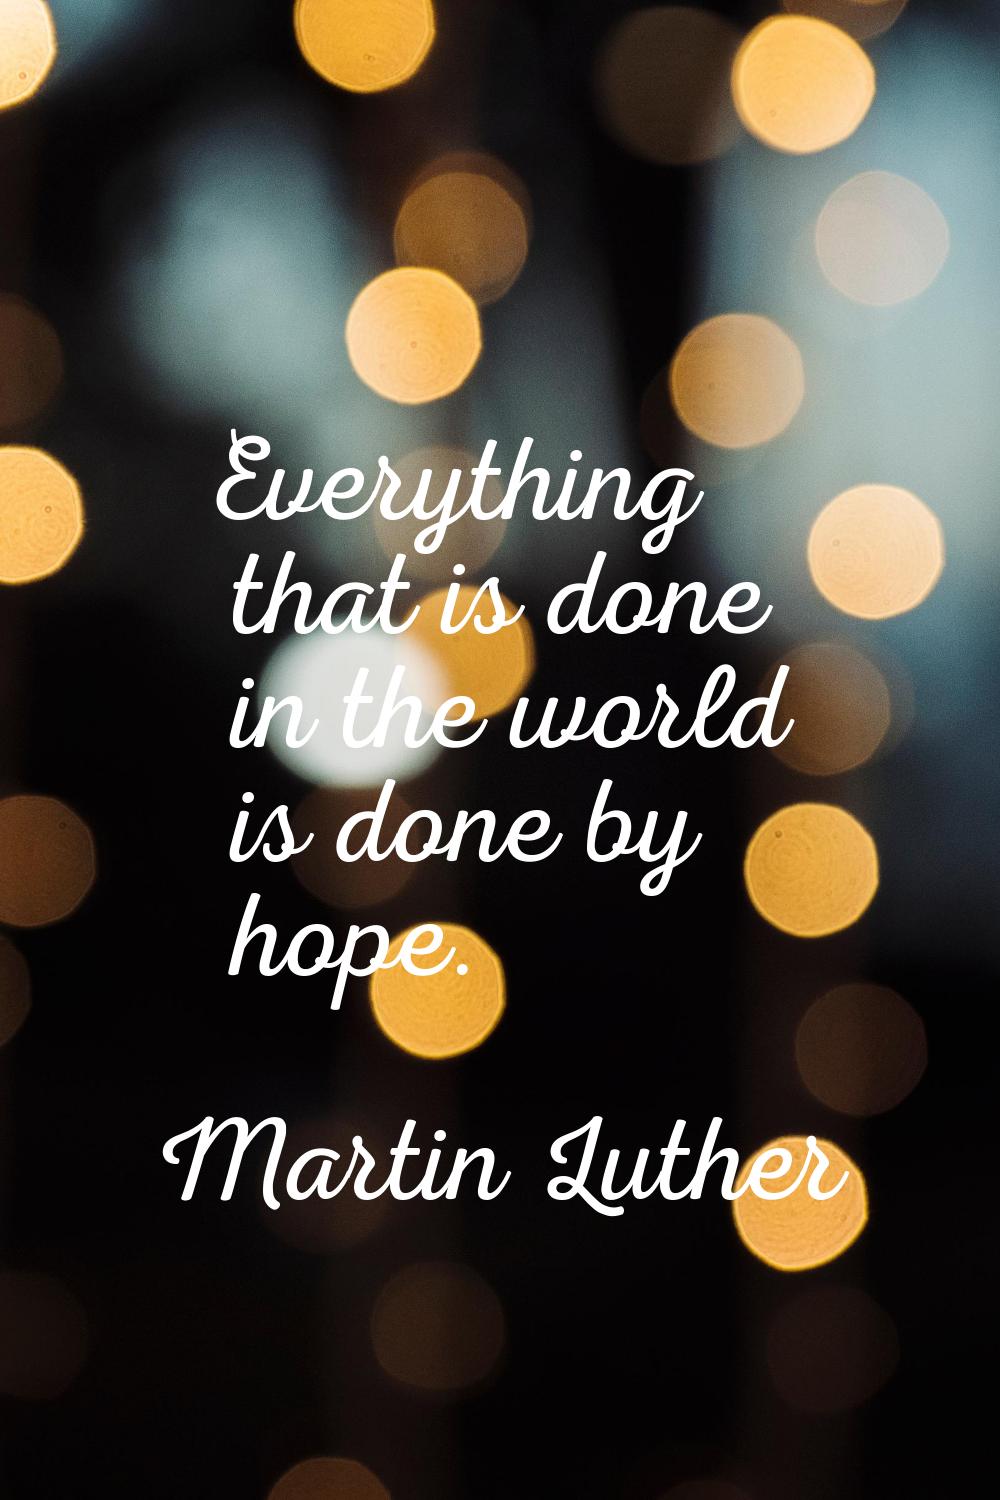 Everything that is done in the world is done by hope.